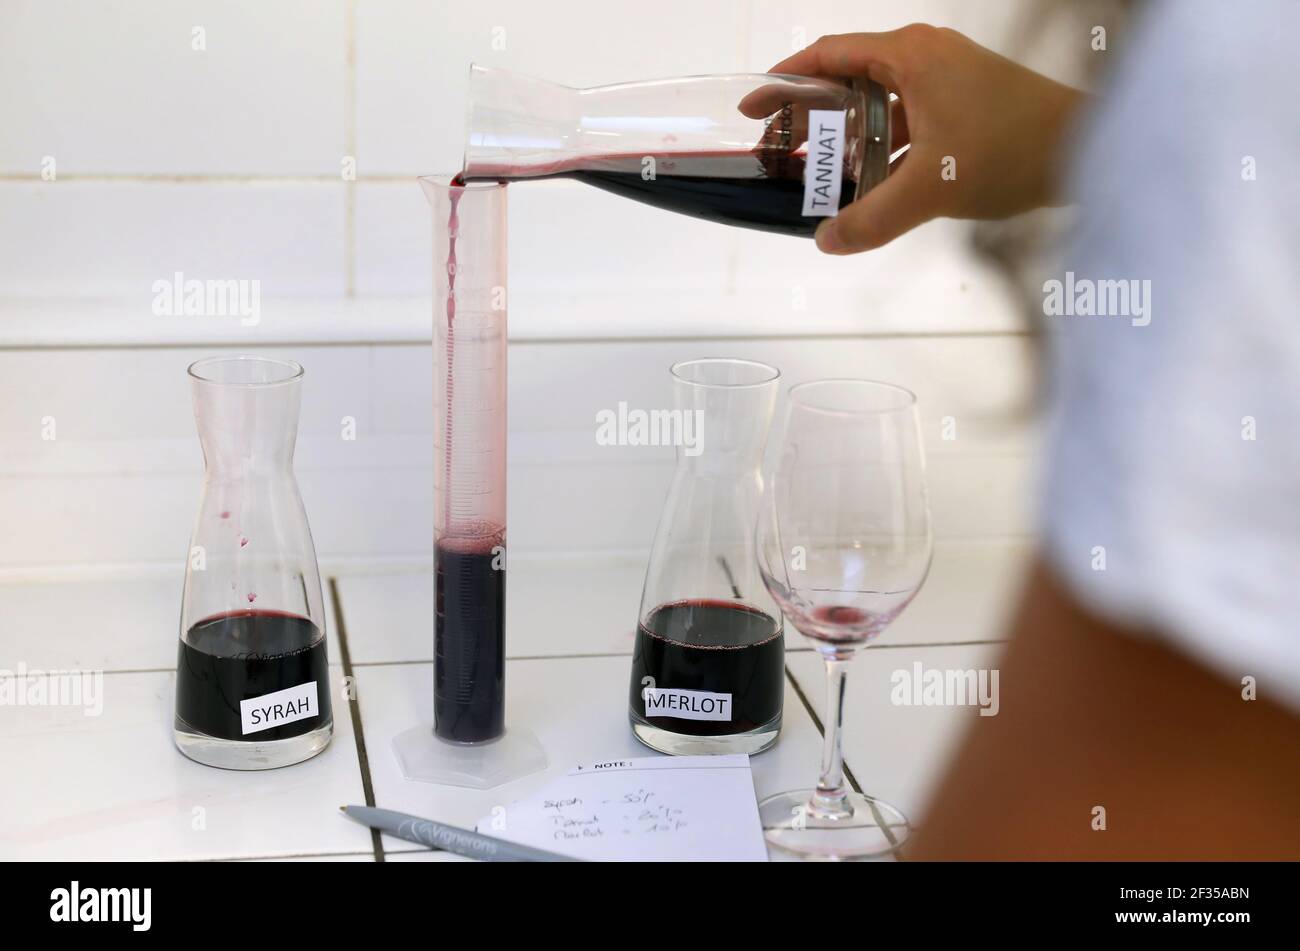 Viticulture, oenology: blend of grape varieties, Syrah, Merlot and Tannat. Laboratory in a winery, blend of red grapes Stock Photo